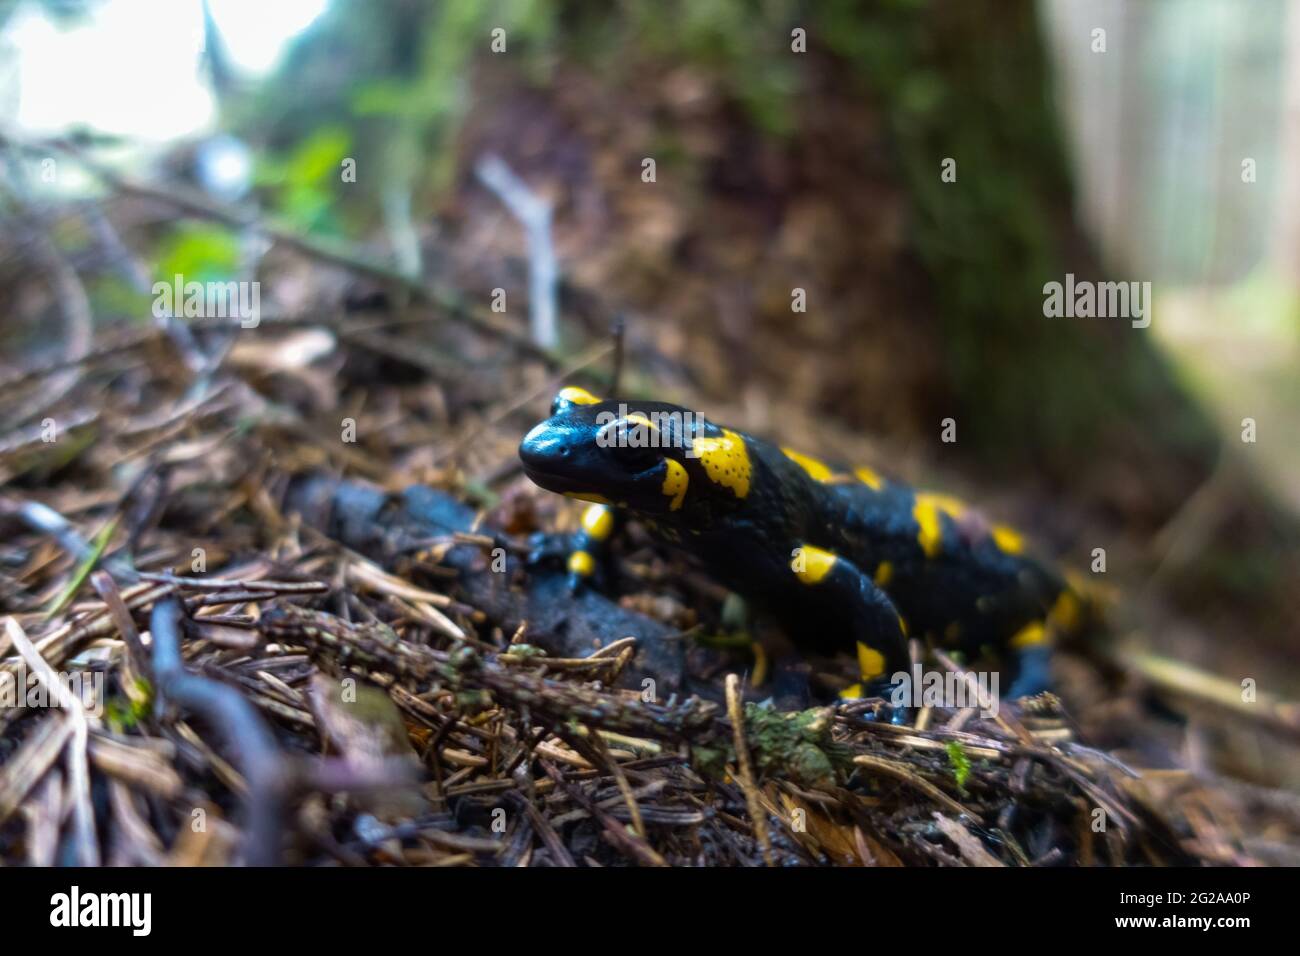 fire salamander crawls over needles from the trees in the forest Stock Photo